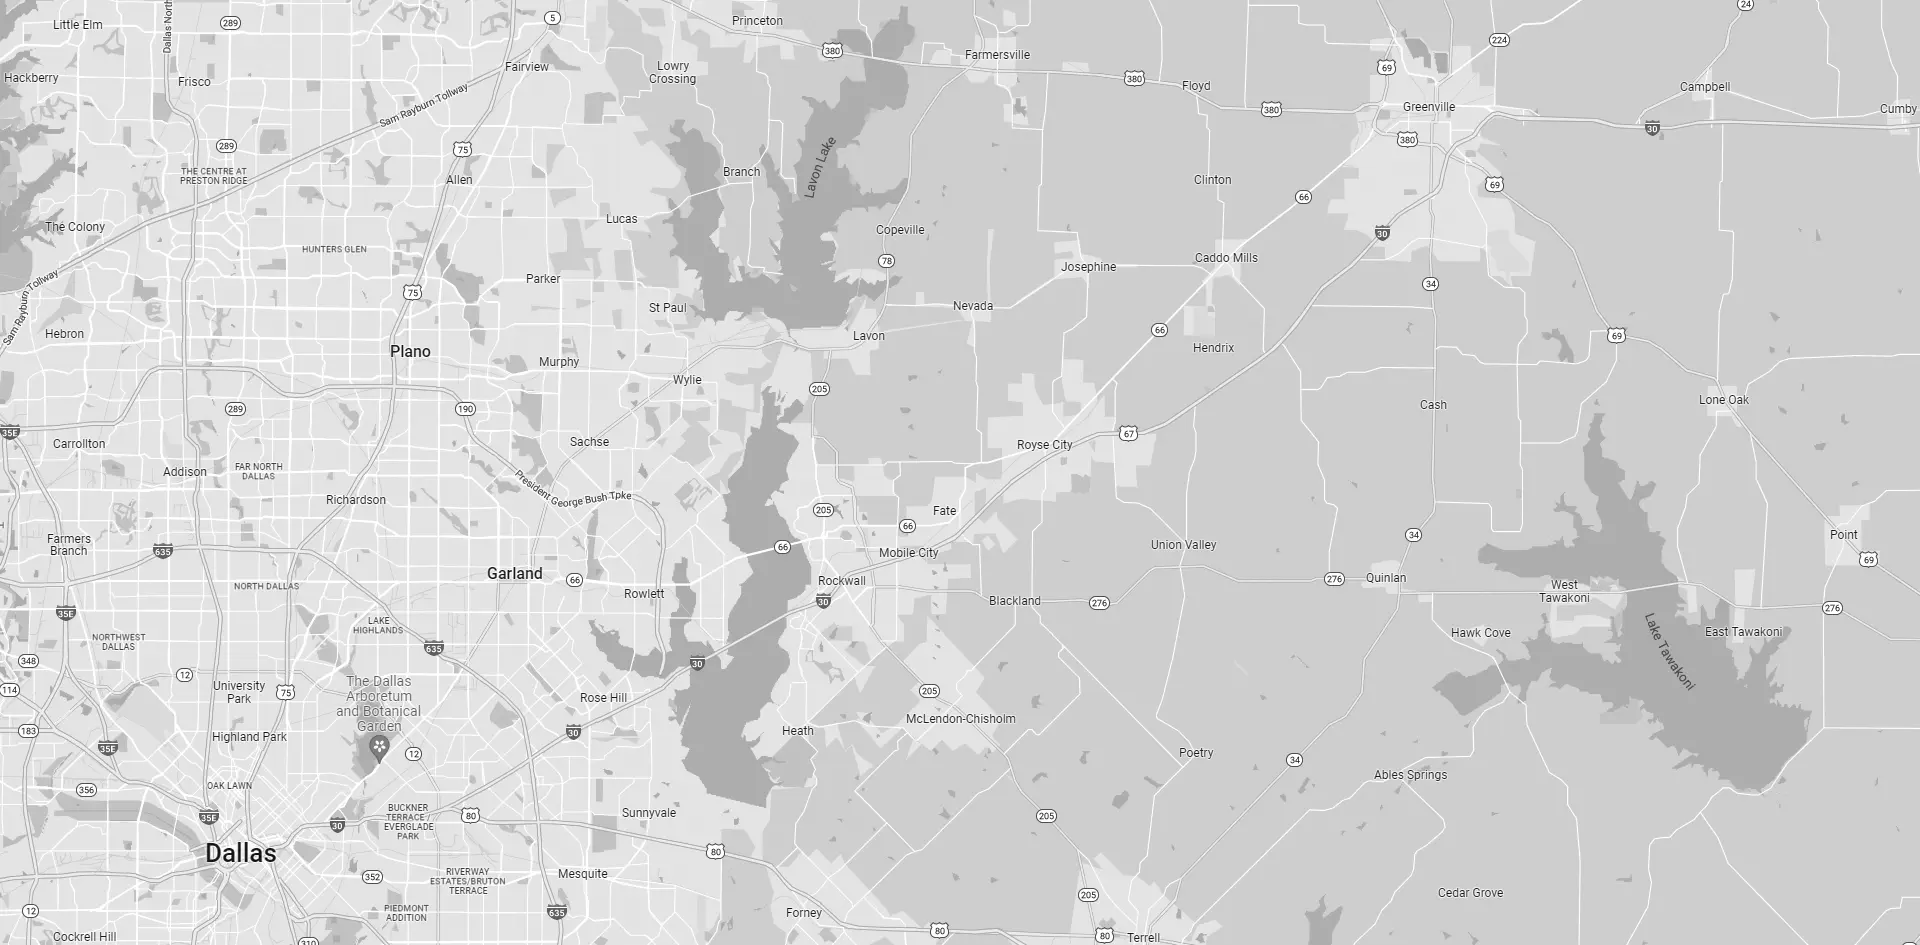 Rockwall, TX area map in black and white.